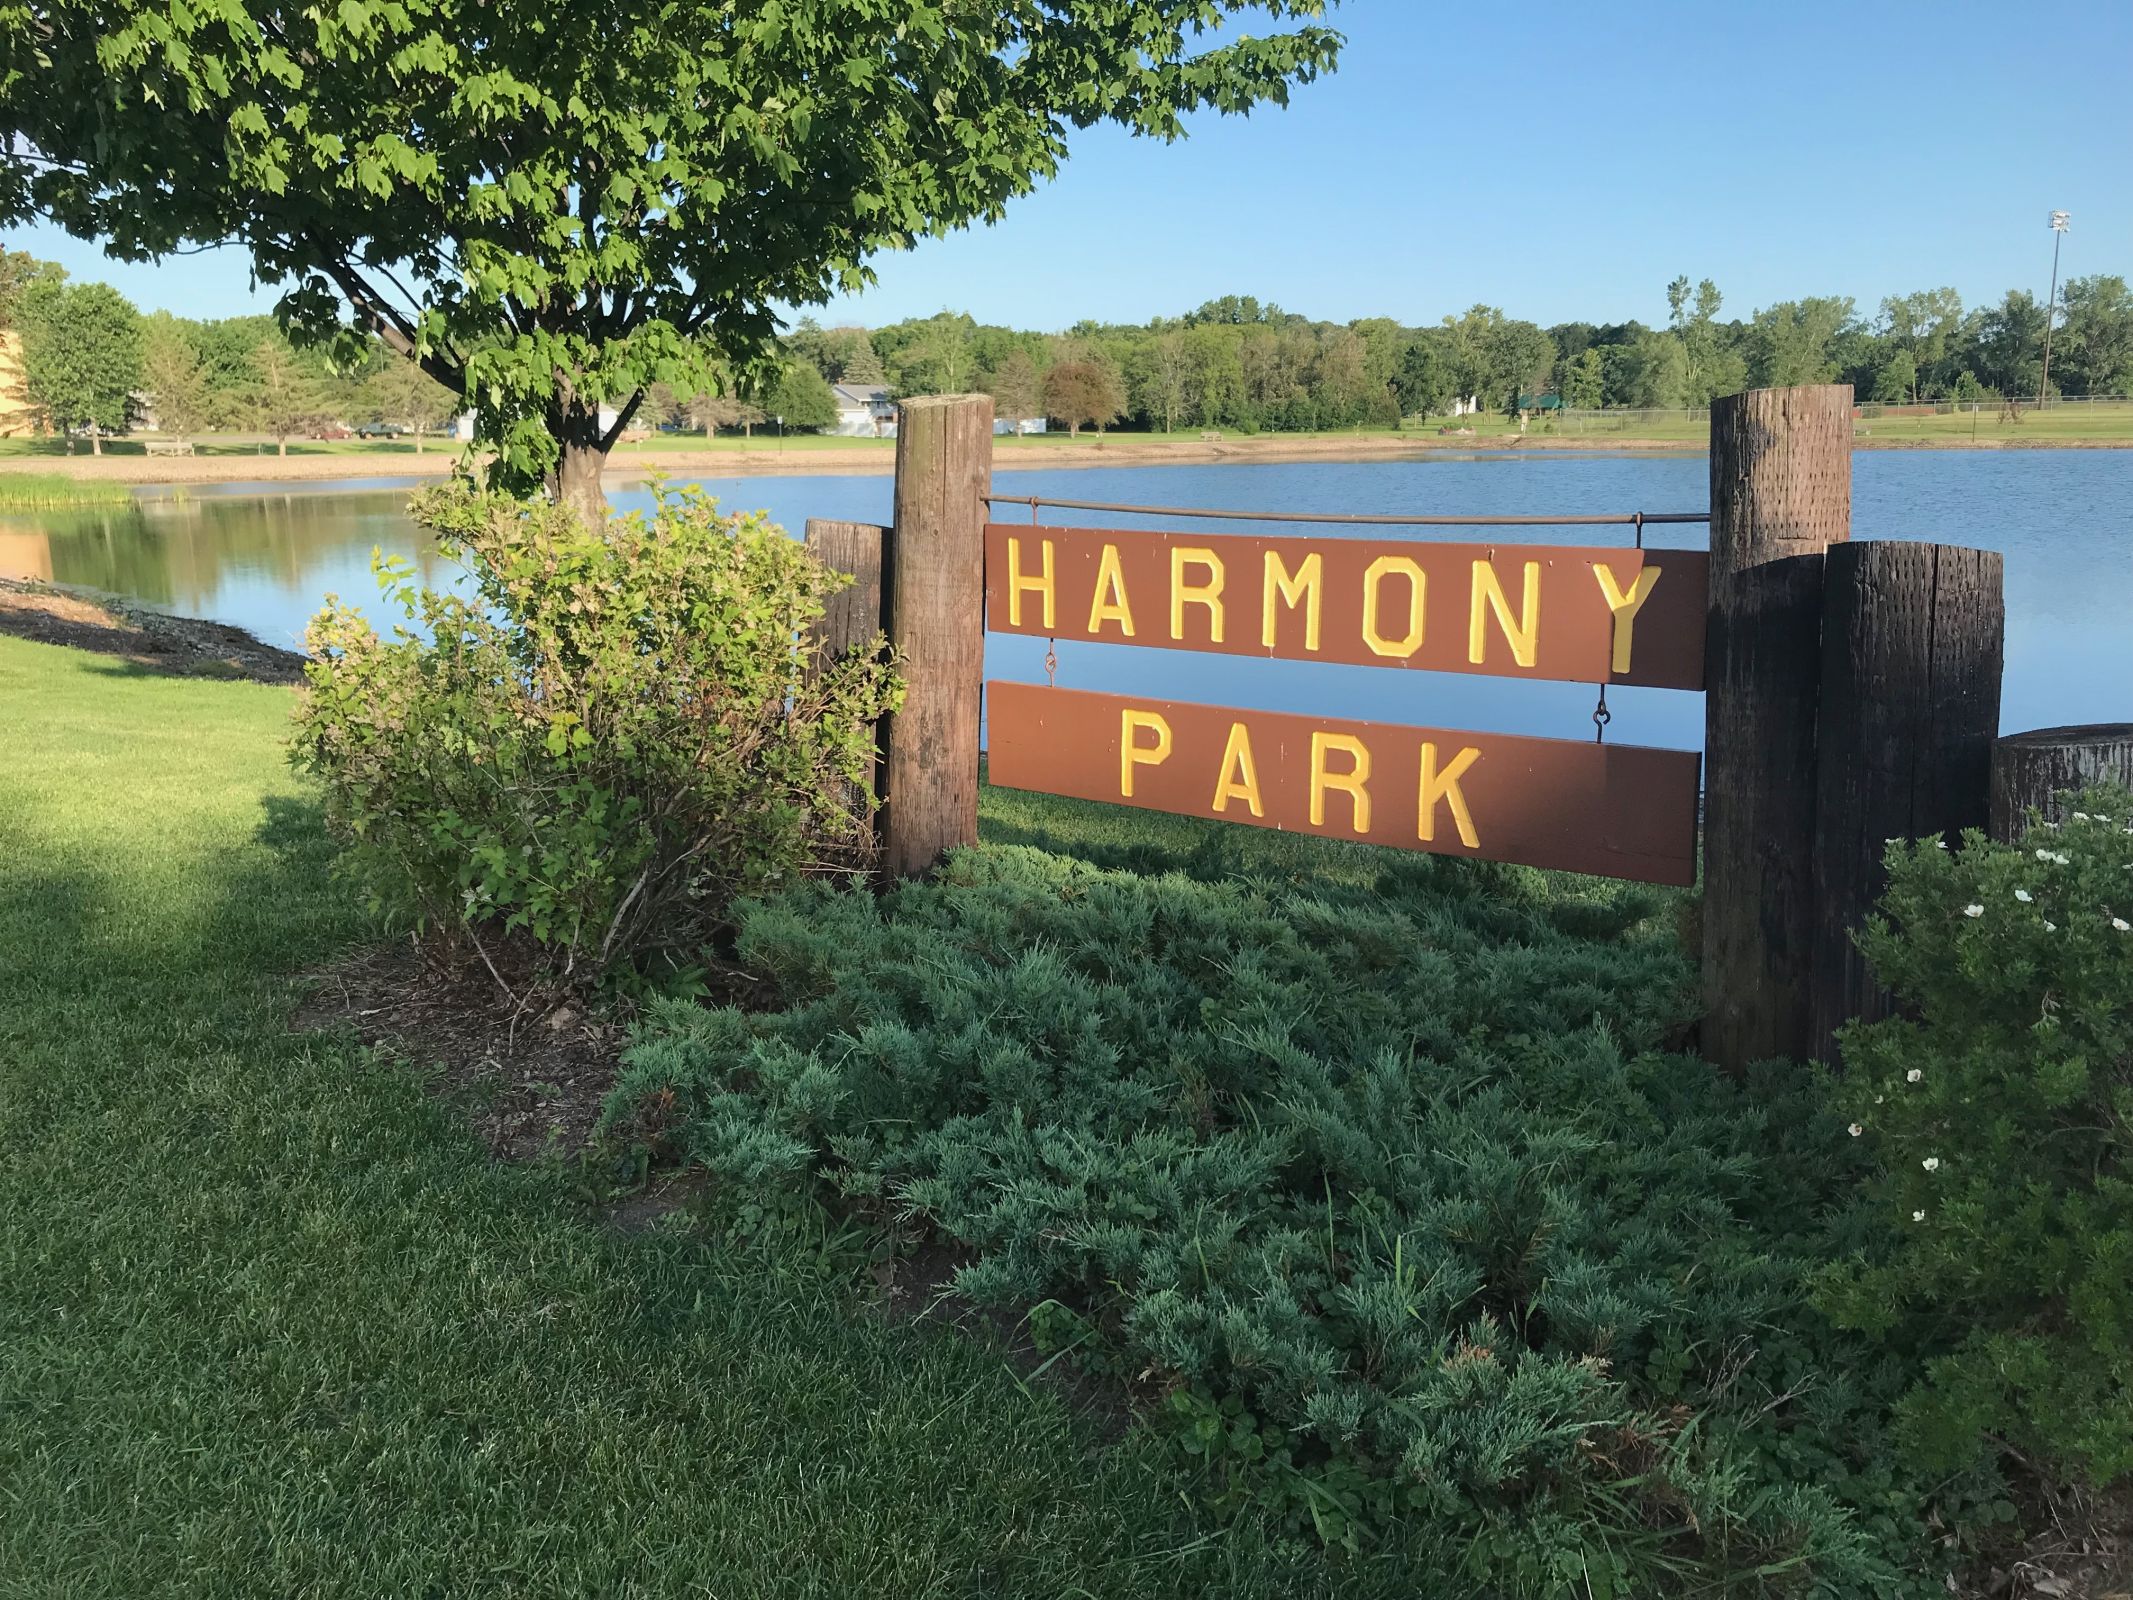 Click the Harmony Park in Long Prairie - Promoting harmony in a diverse community Slide Photo to Open